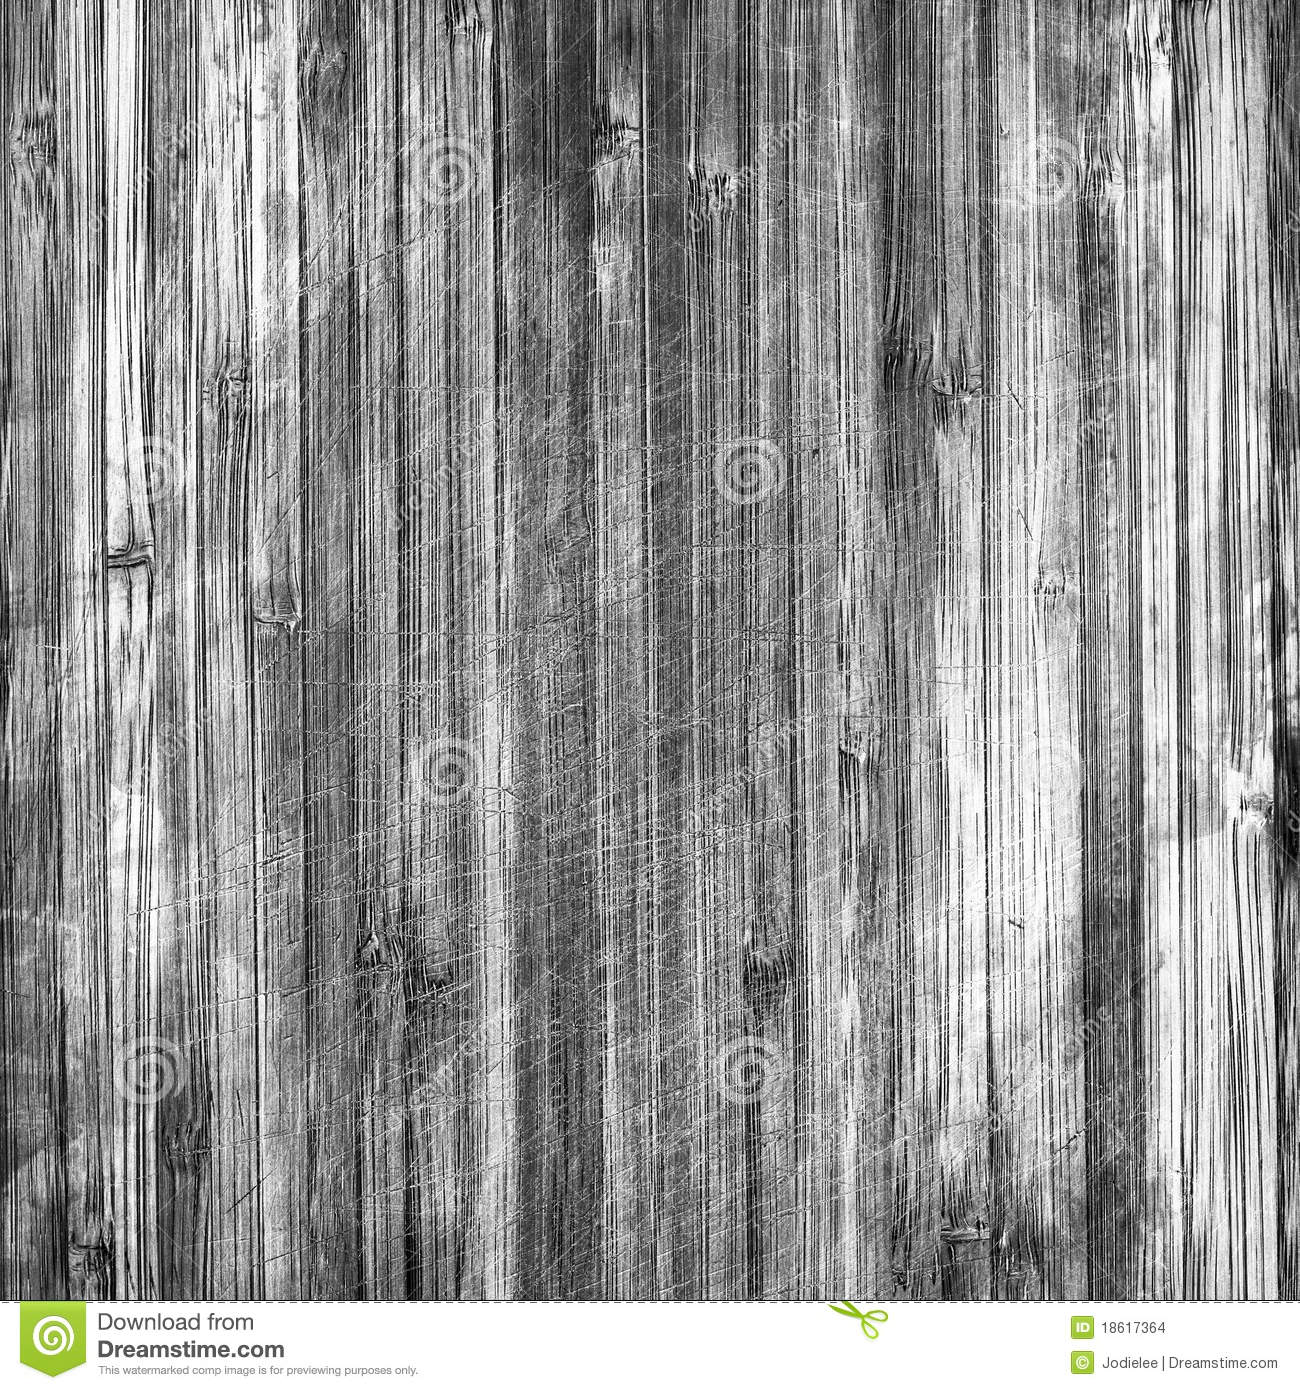 Black And White Vintage Wood Grain Texture Stock Images   Image